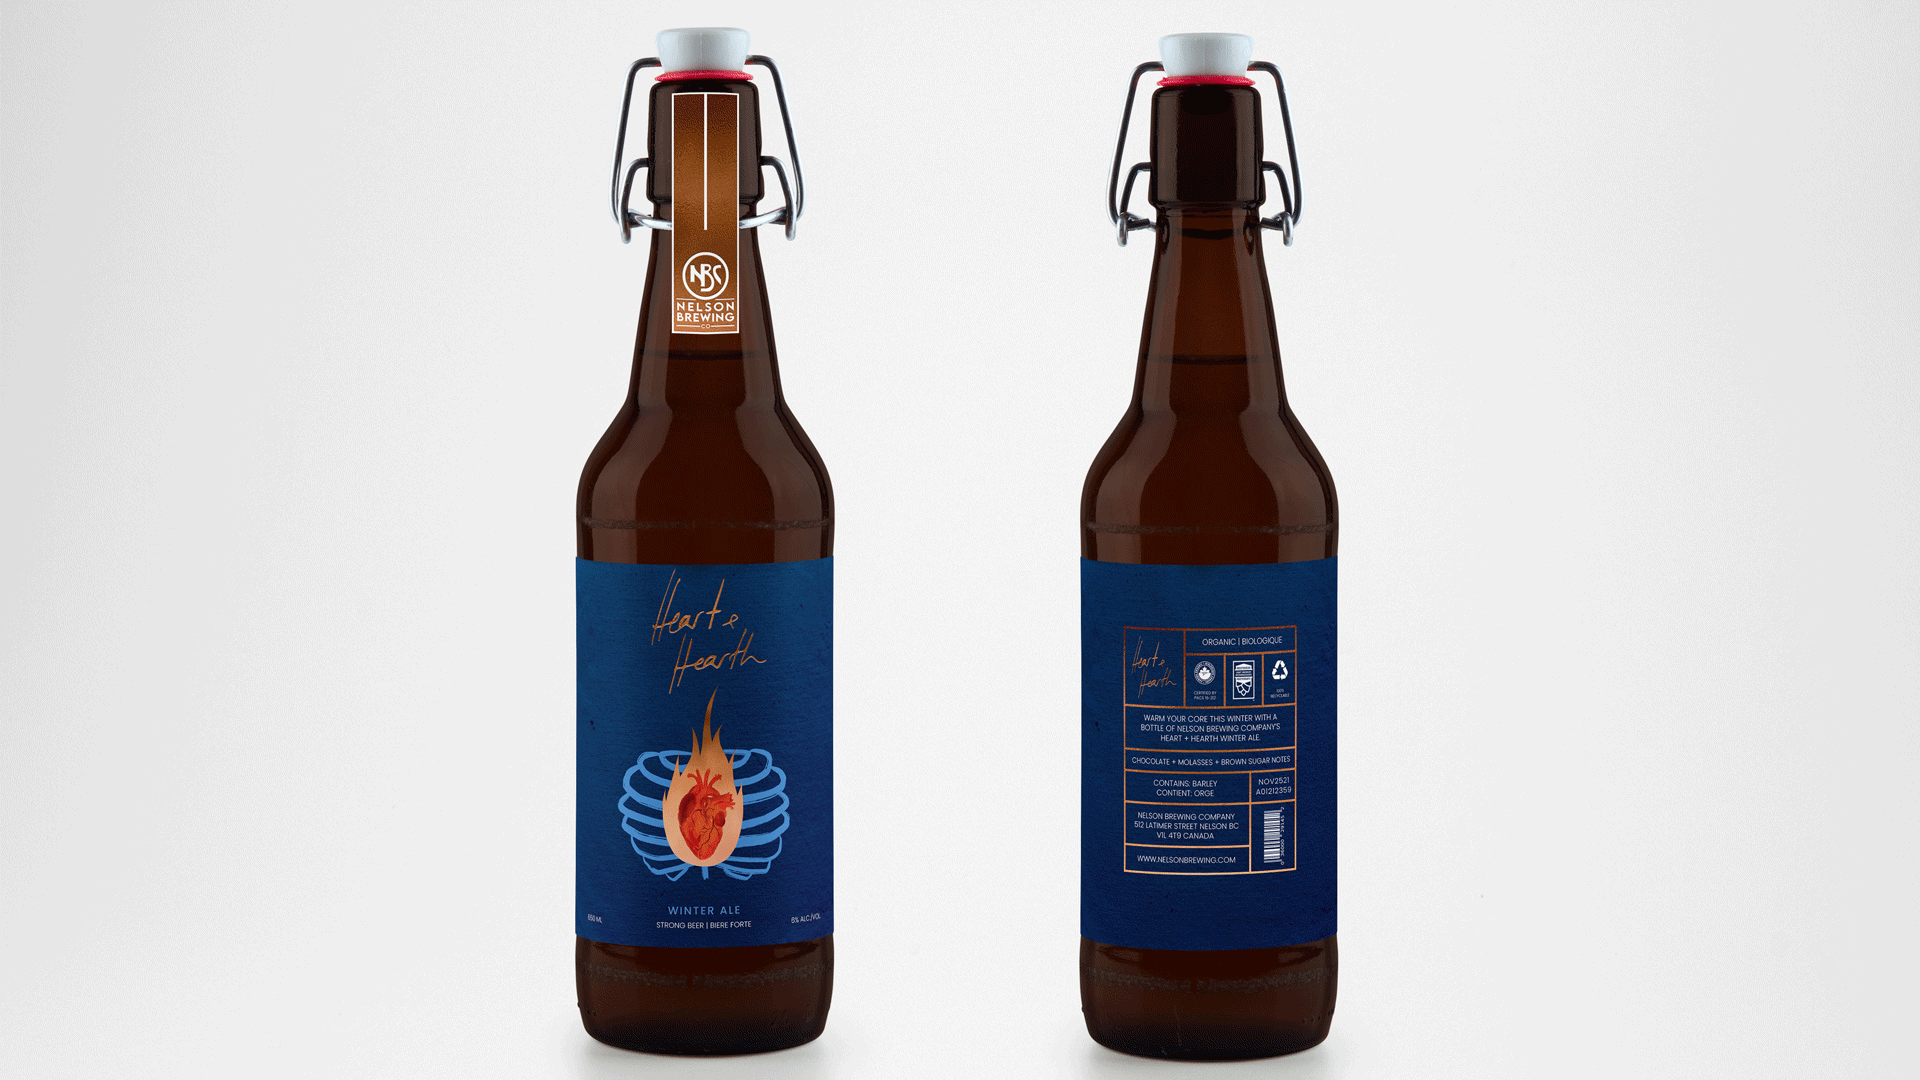 Alternating images of packaging and merch design for Nelson Brewing’s Heart & Hearth winter ale.